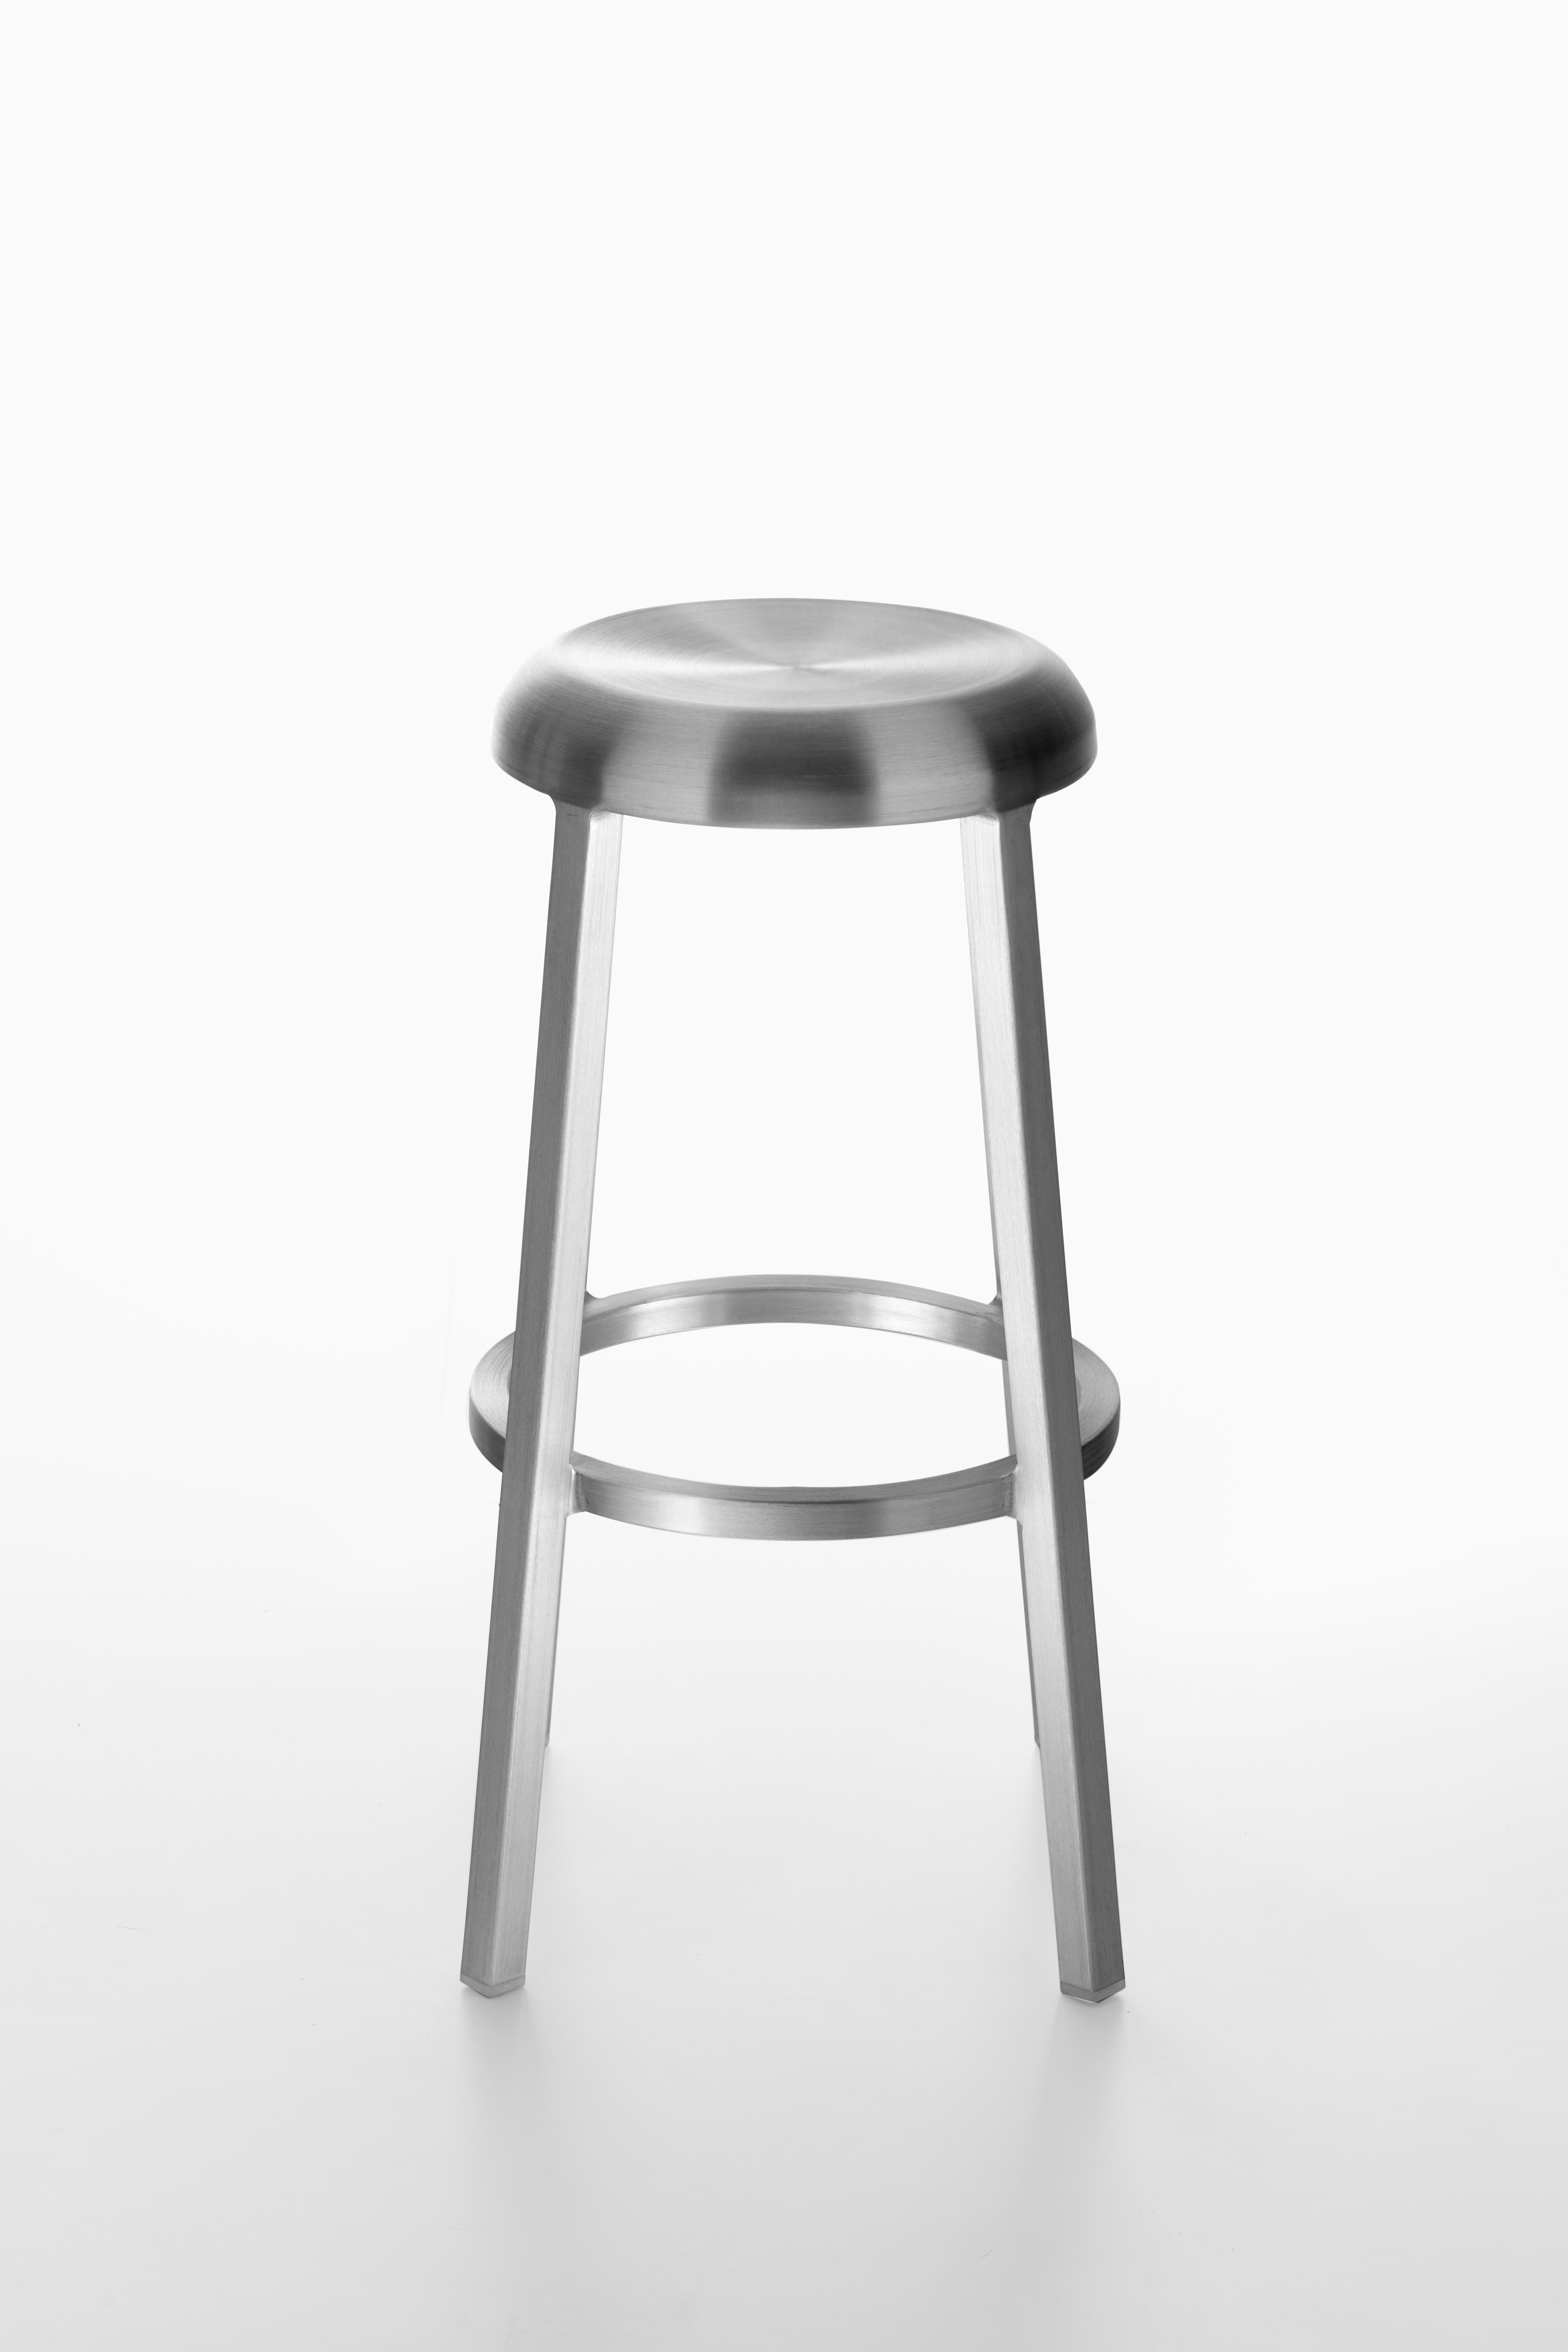 Za is a family of stools in three heights, handcrafted from recycled aluminum and guaranteed for life. “Za” means “a place to sit” in Japanese – a name that speaks to the multi-functionality of a simple stool that can be used anywhere, indoors and